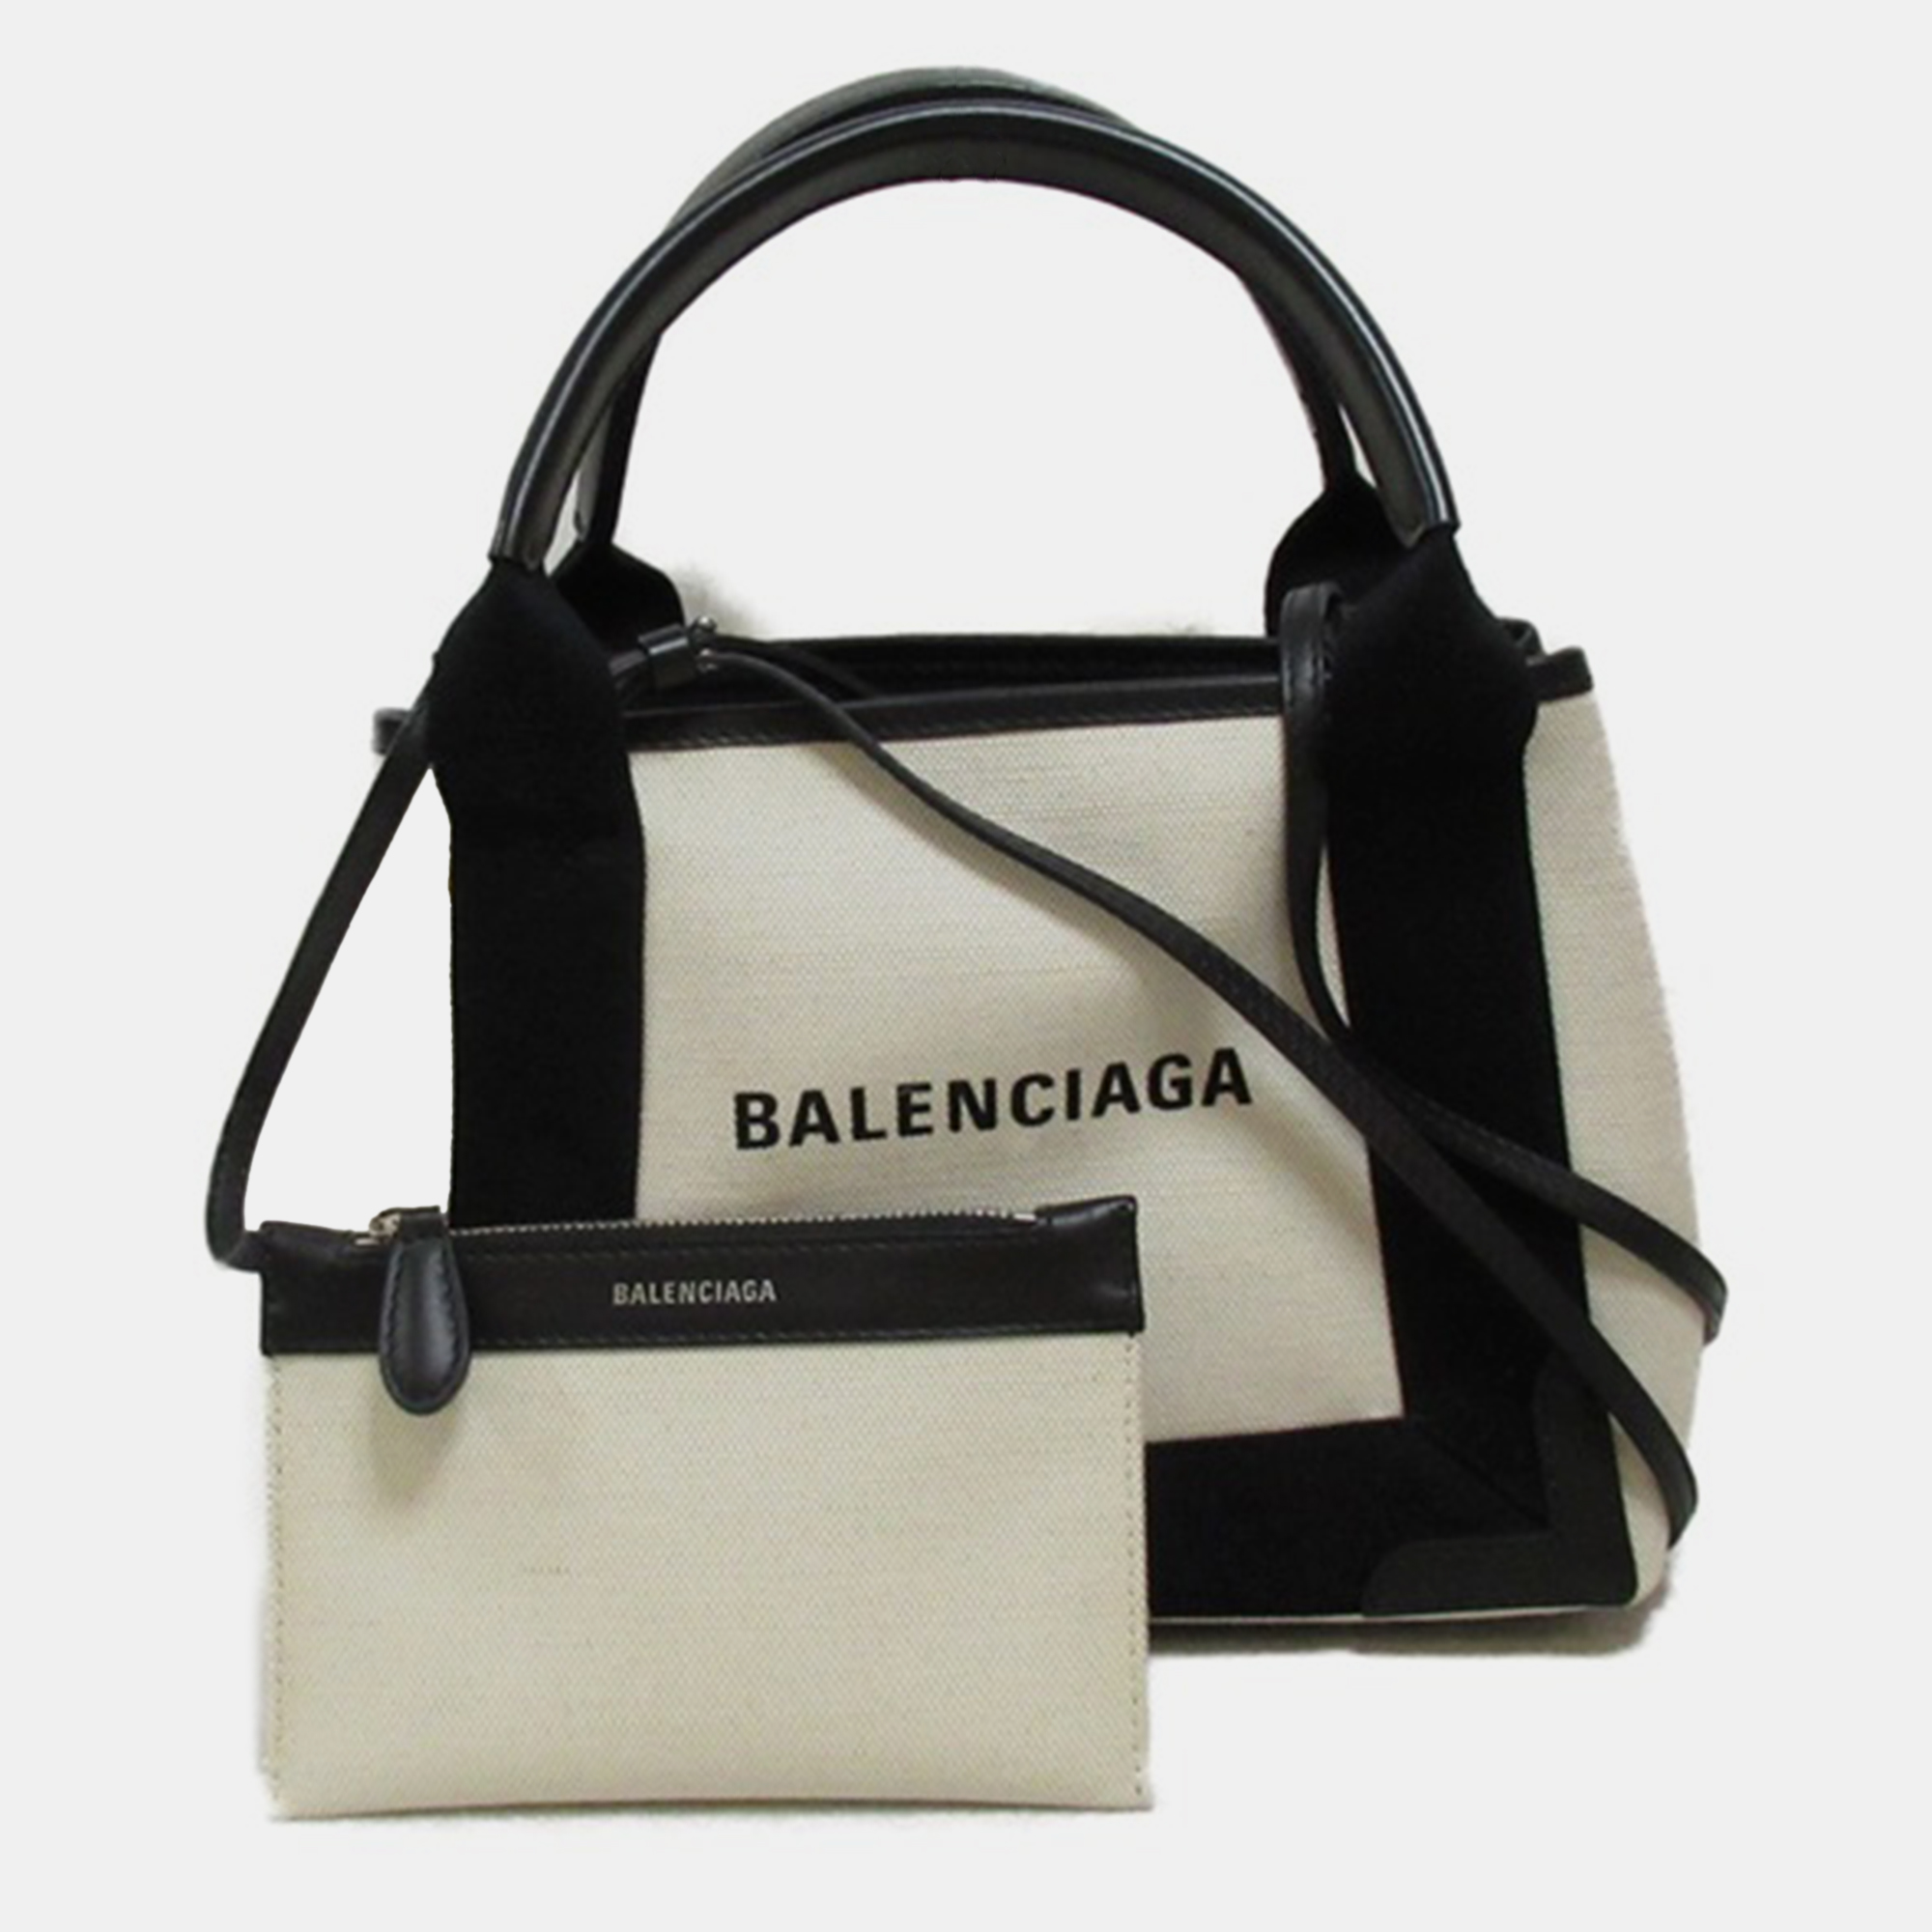 Elevate your every day with this Balenciaga tote. Meticulously designed it seamlessly blends functionality with luxury offering the perfect accessory to showcase your discerning style while effortlessly carrying your essentials.